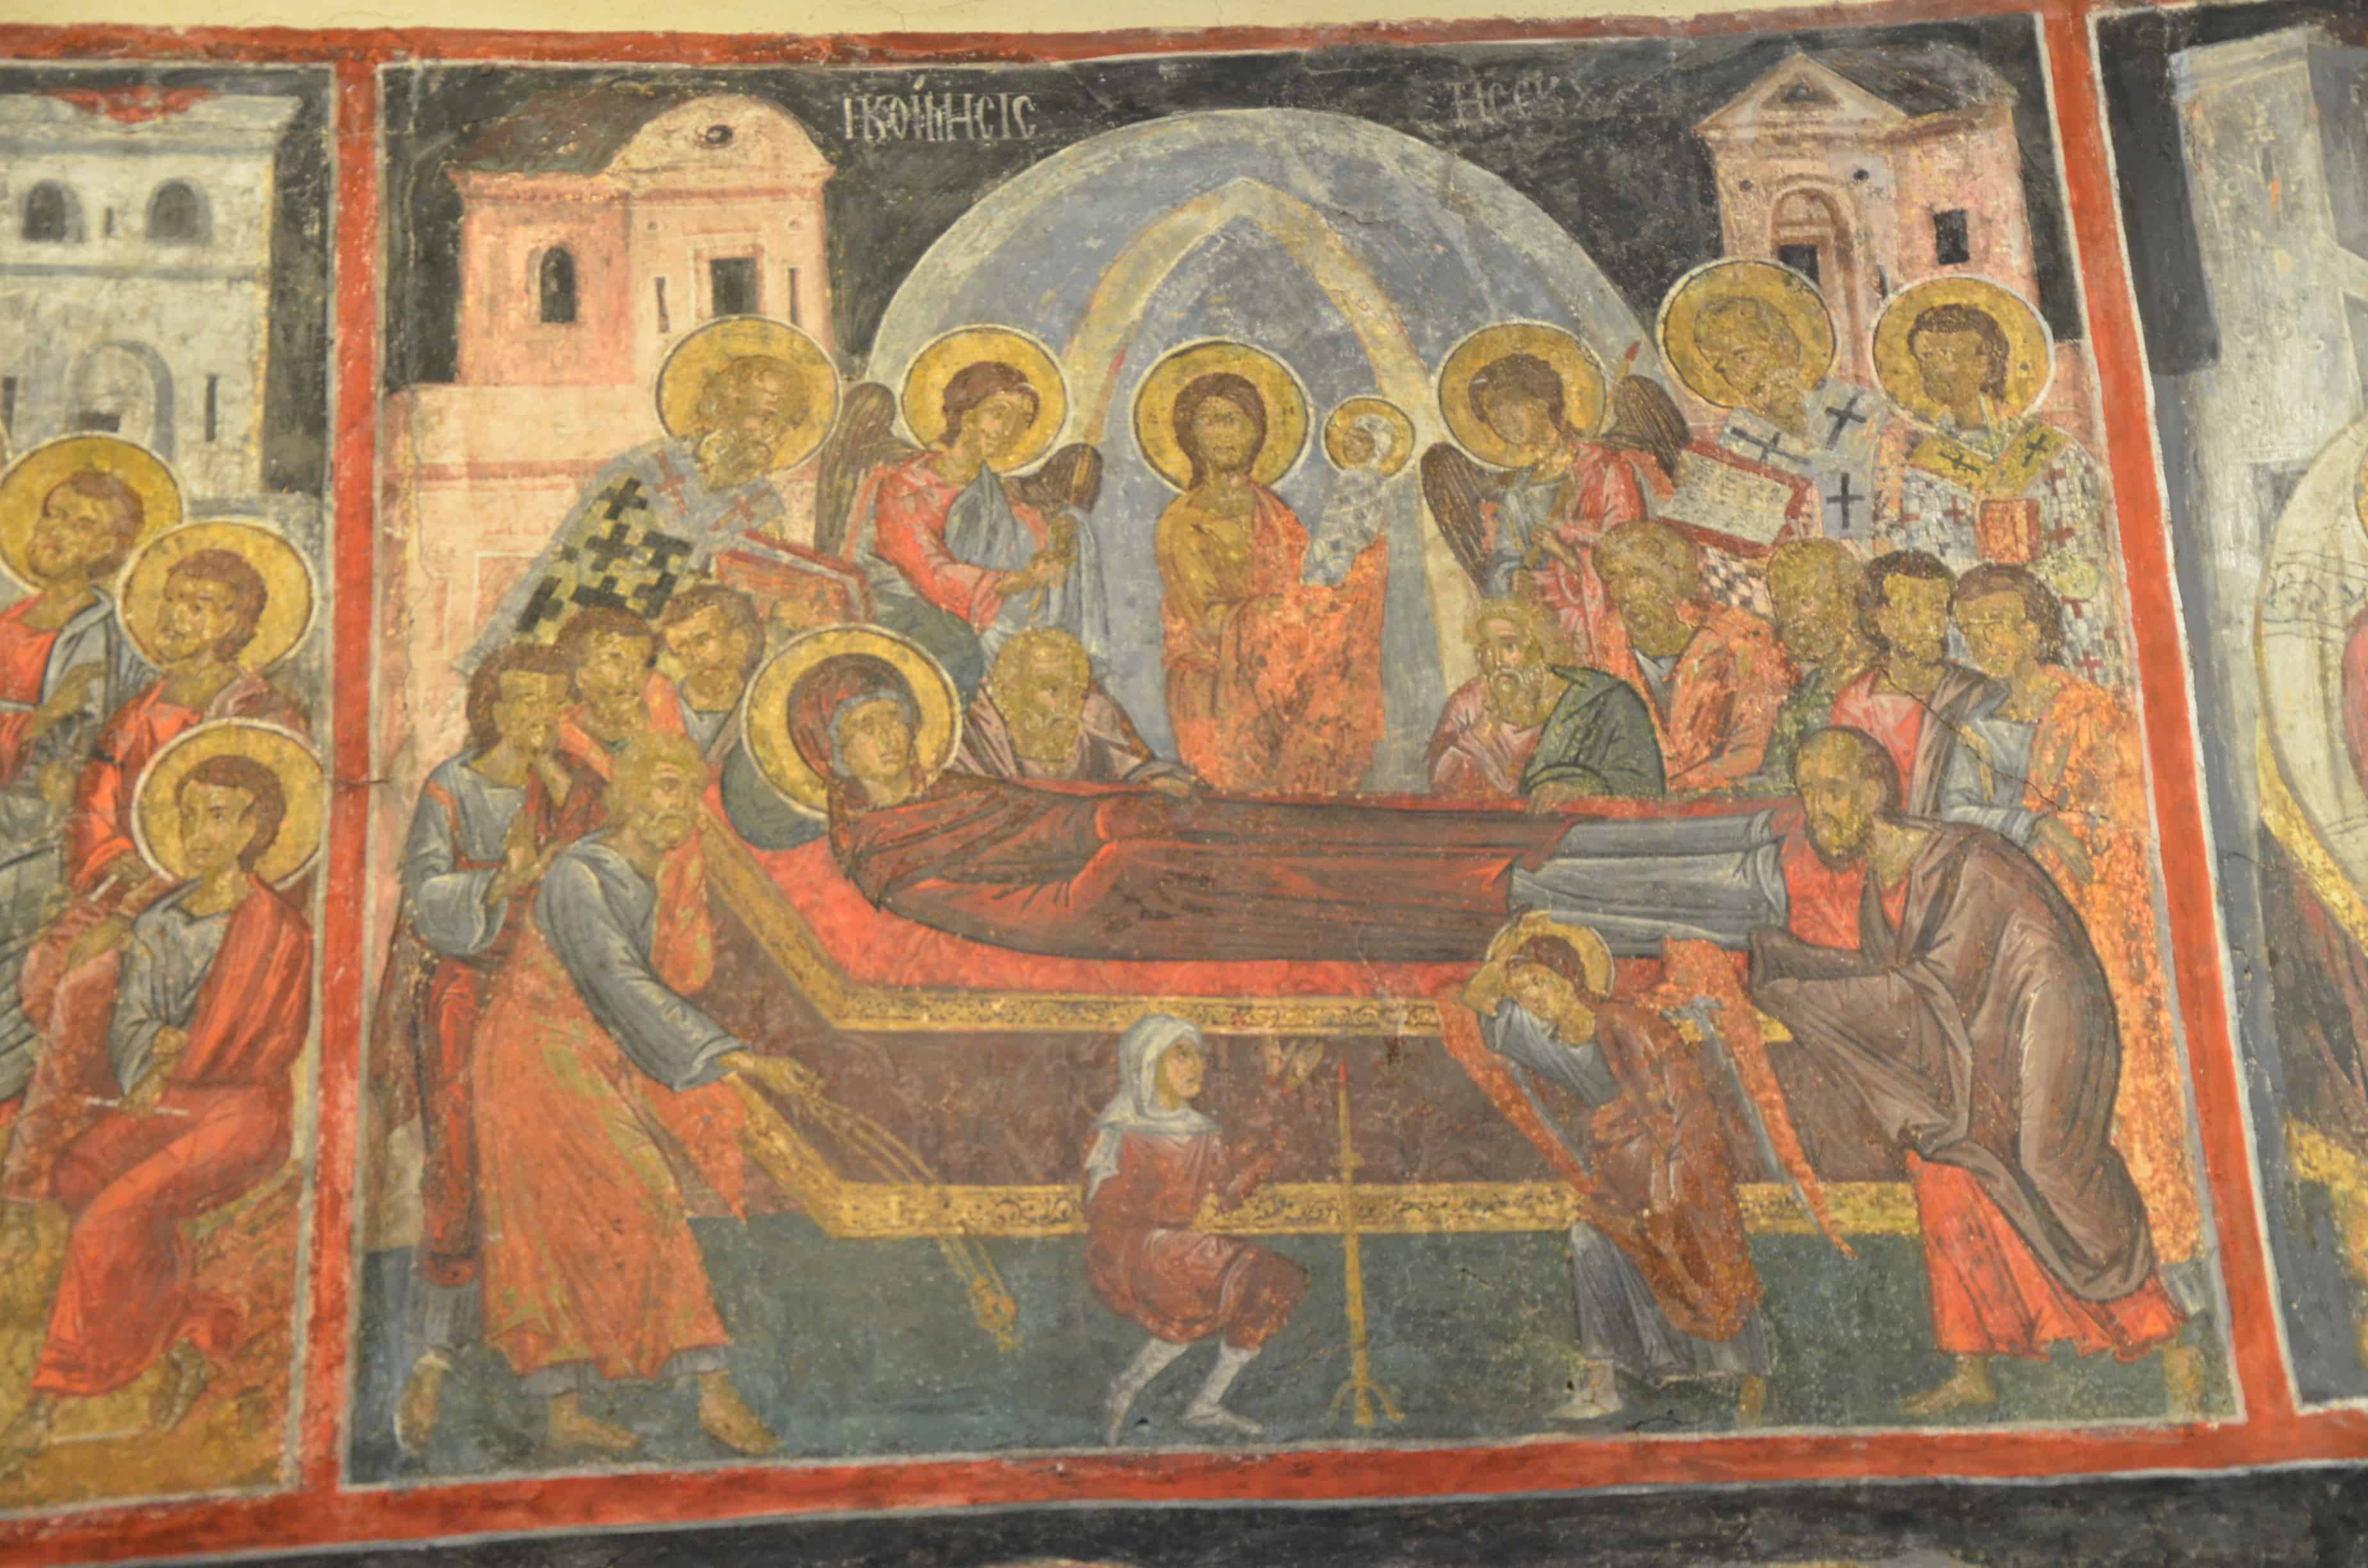 Dormition of the Virgin in the Church of the Holy Saviour in Nessebar, Bulgaria